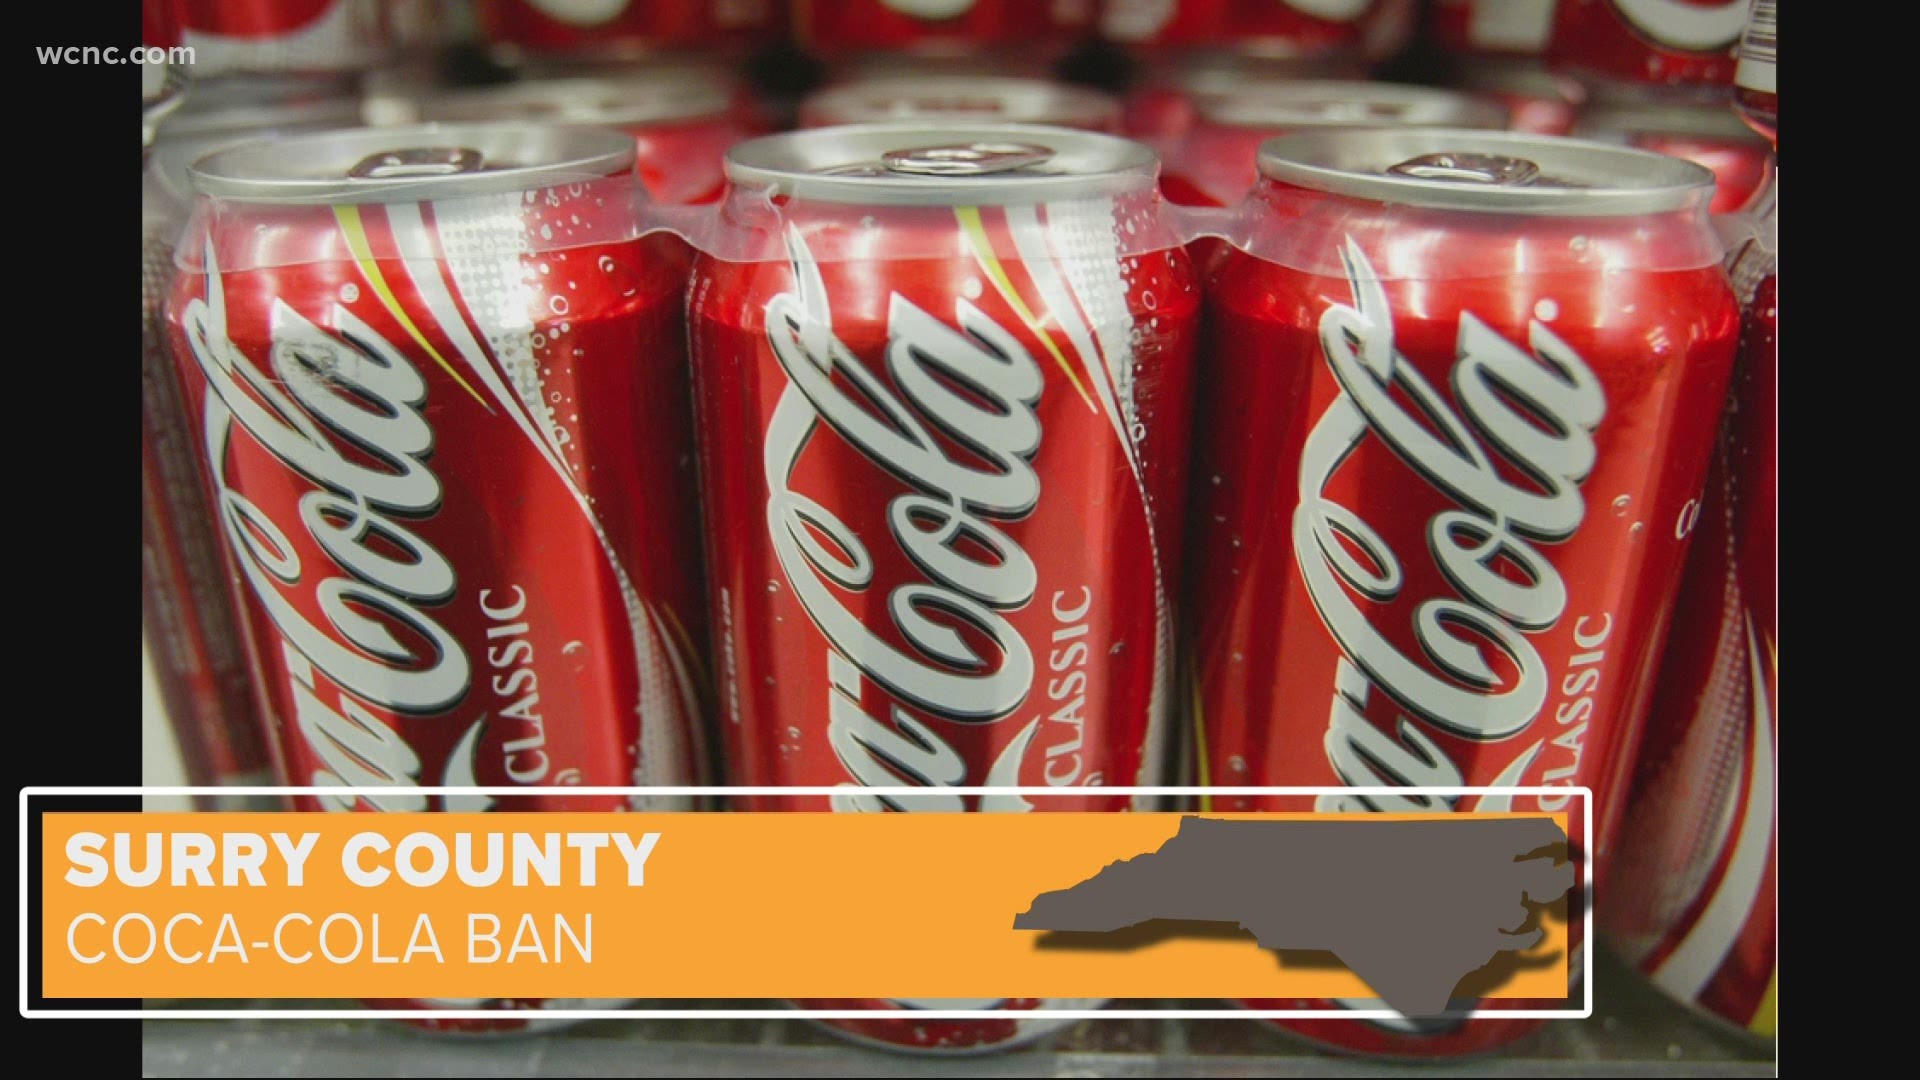 Officials in Surry County announced this week that they will ban Coca-Cola machines in government offices due to their "left-wing politics."